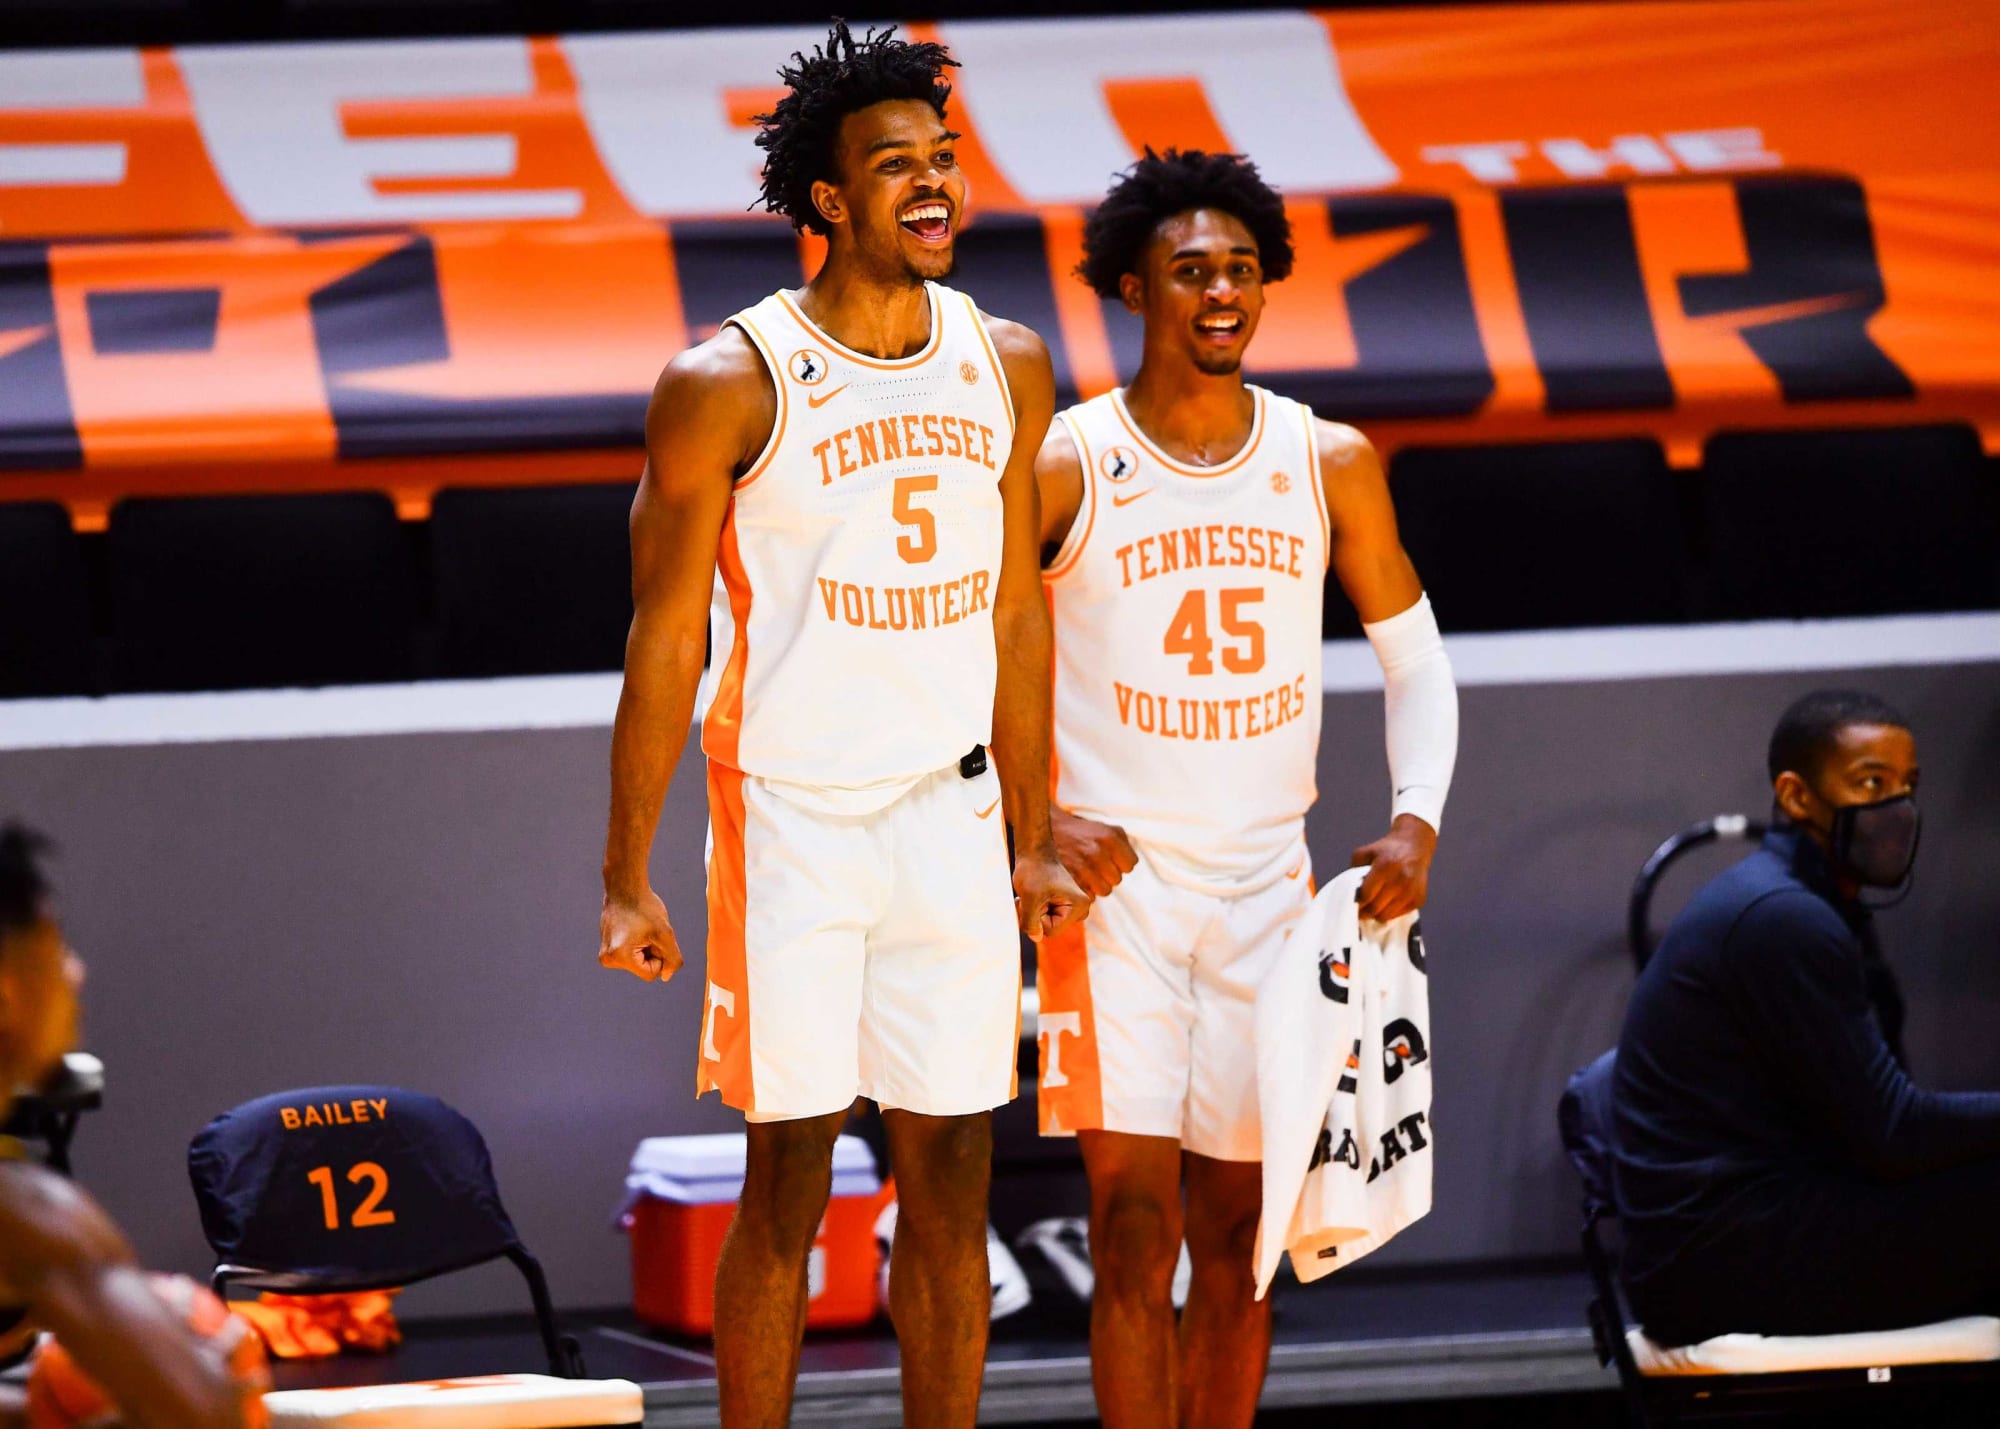 Keon Johnson Combine Vertical Record, Remember when Tennessee Basketball's Keon  Johnson jumped then jumped again mid-air to set a new draft combine record  with a 48.0-inch vertical leap? 🤯